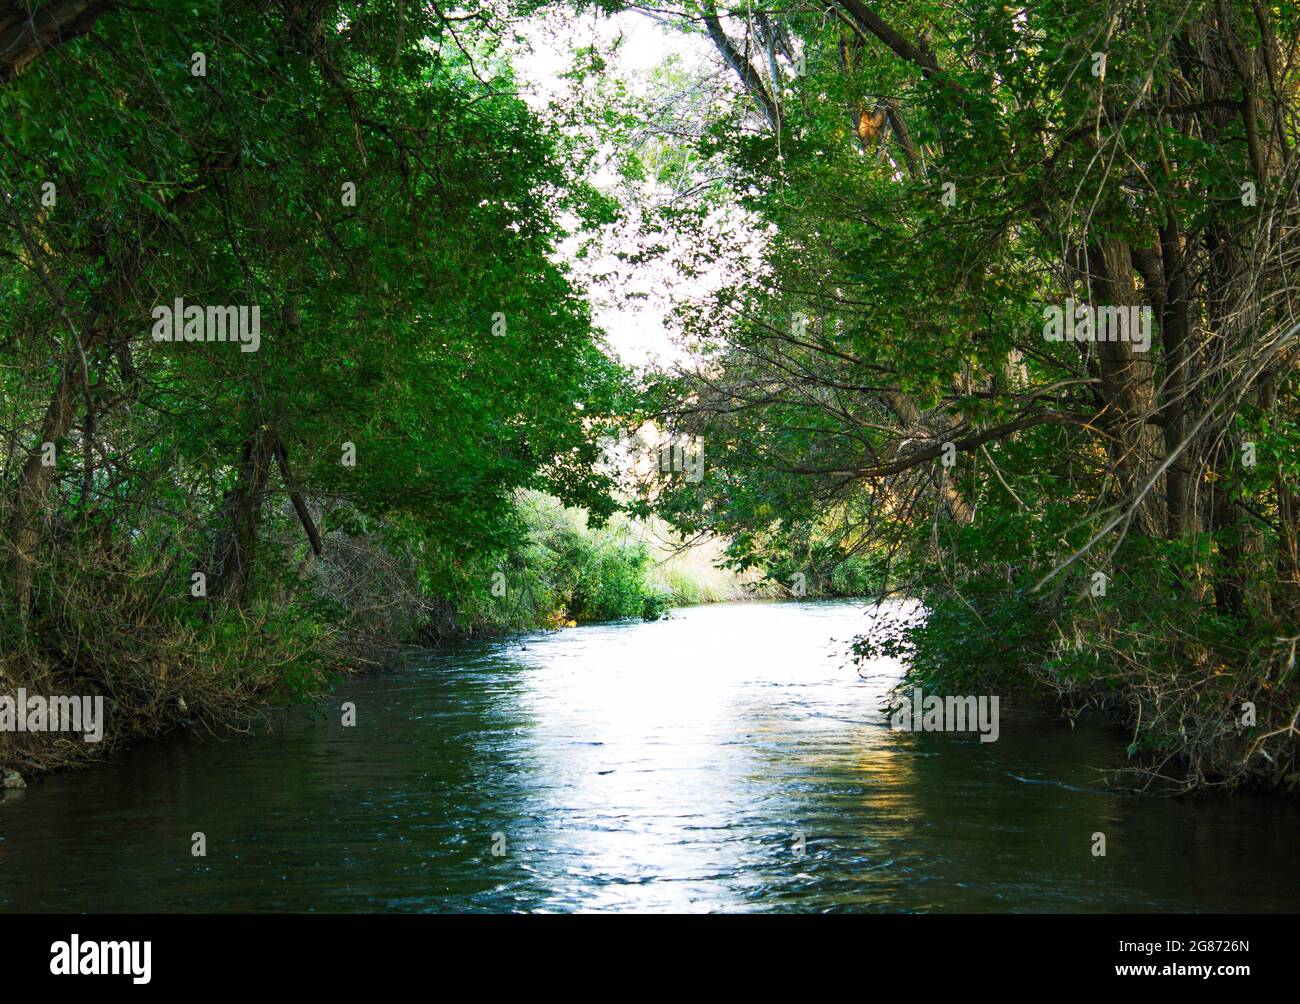 River surrounded by trees Stock Photo